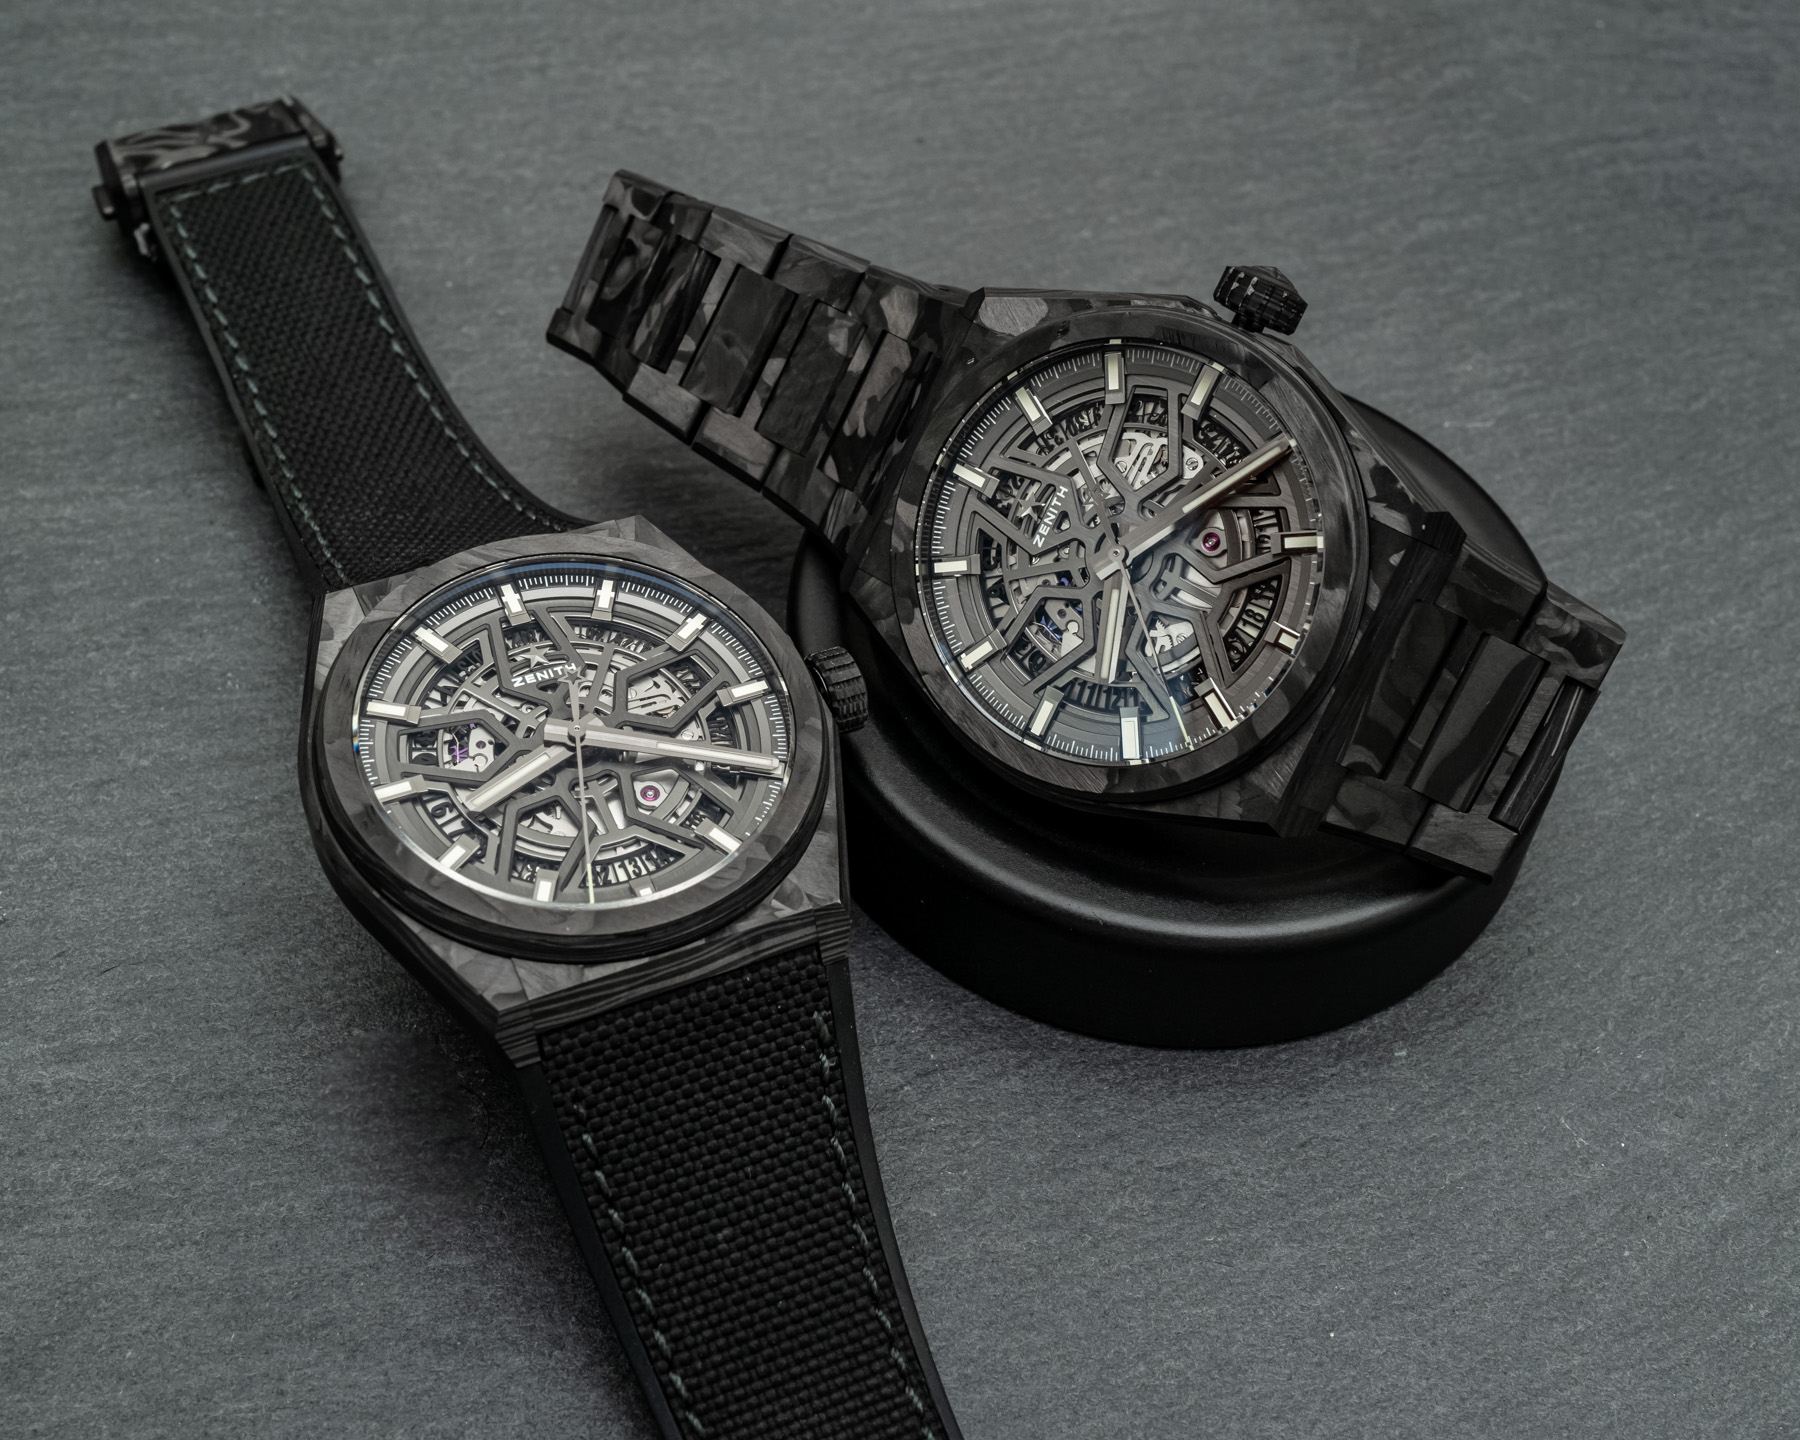 Zenith Defy Classic Carbon Replica Watch Introduces All-Carbon Fiber Case And Integrated Bracelet